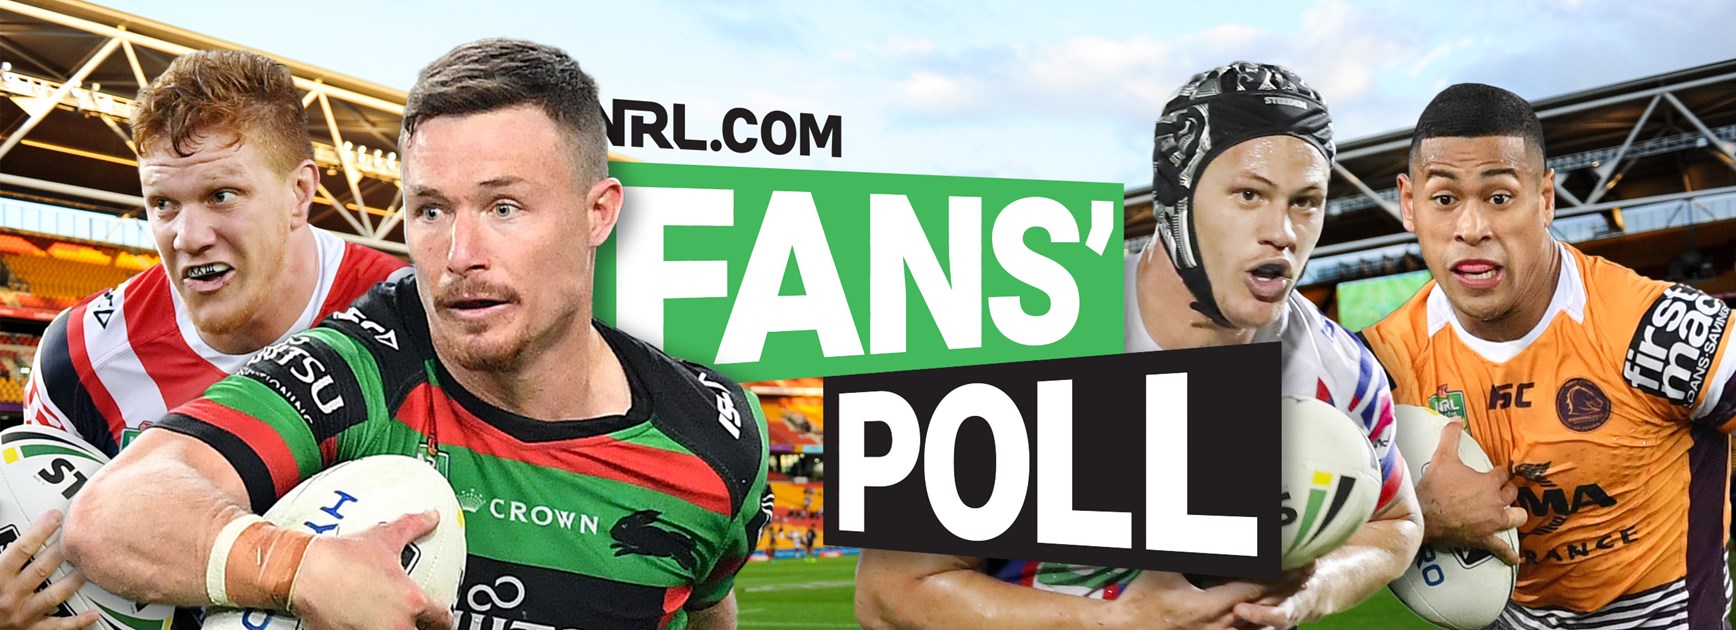 NRL Official Fans Poll: The results are in